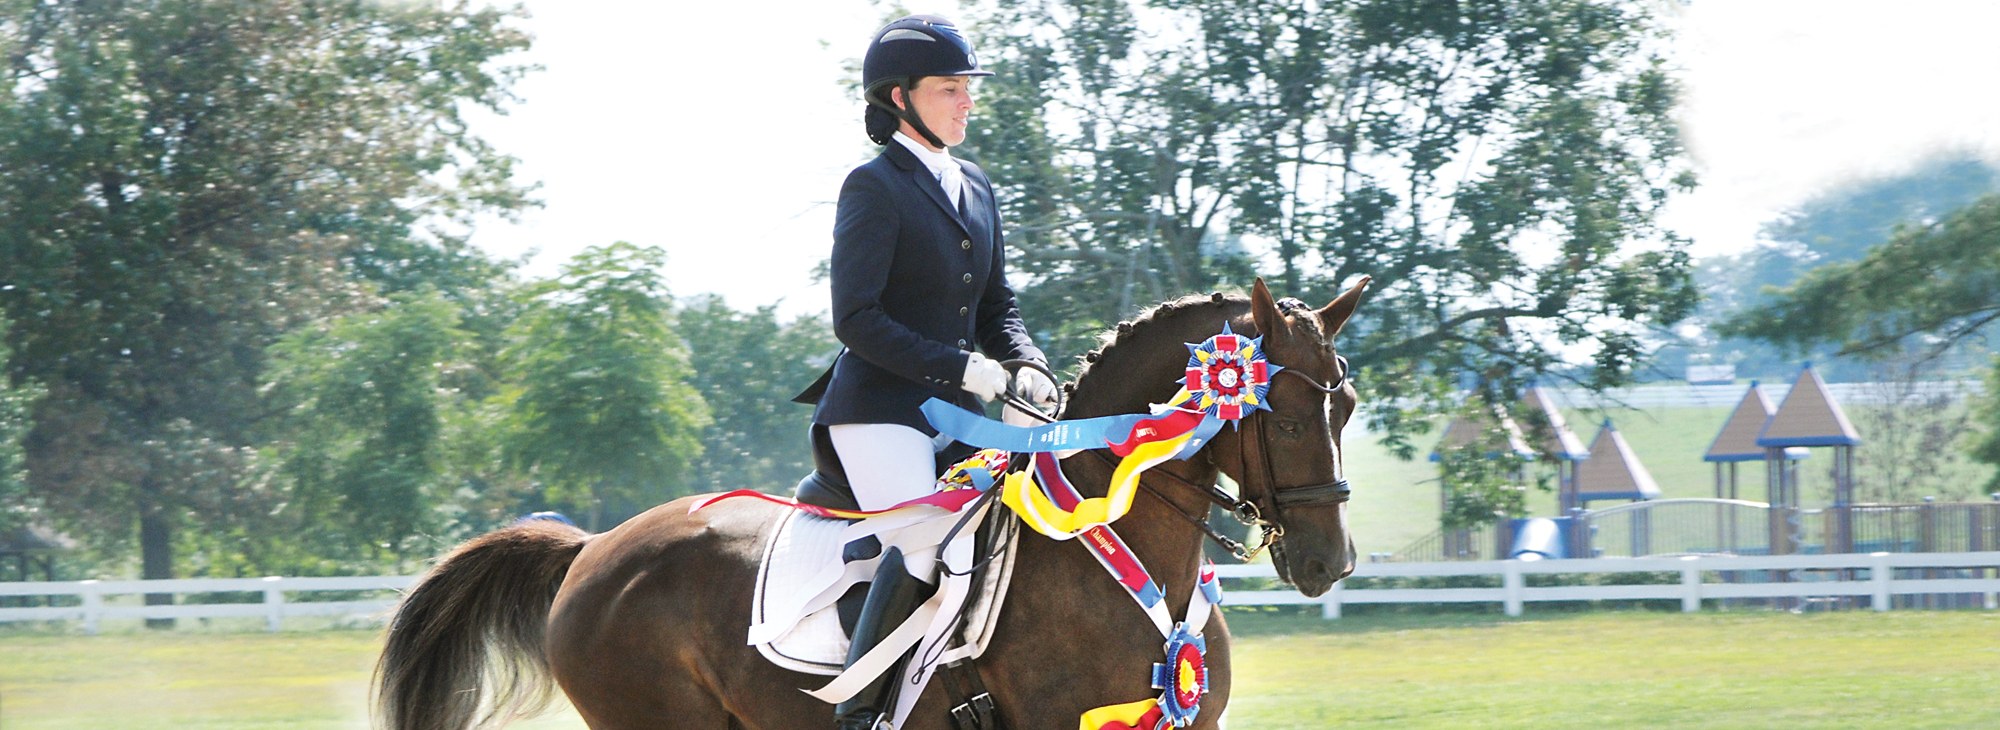 Dressage Horse and Rider